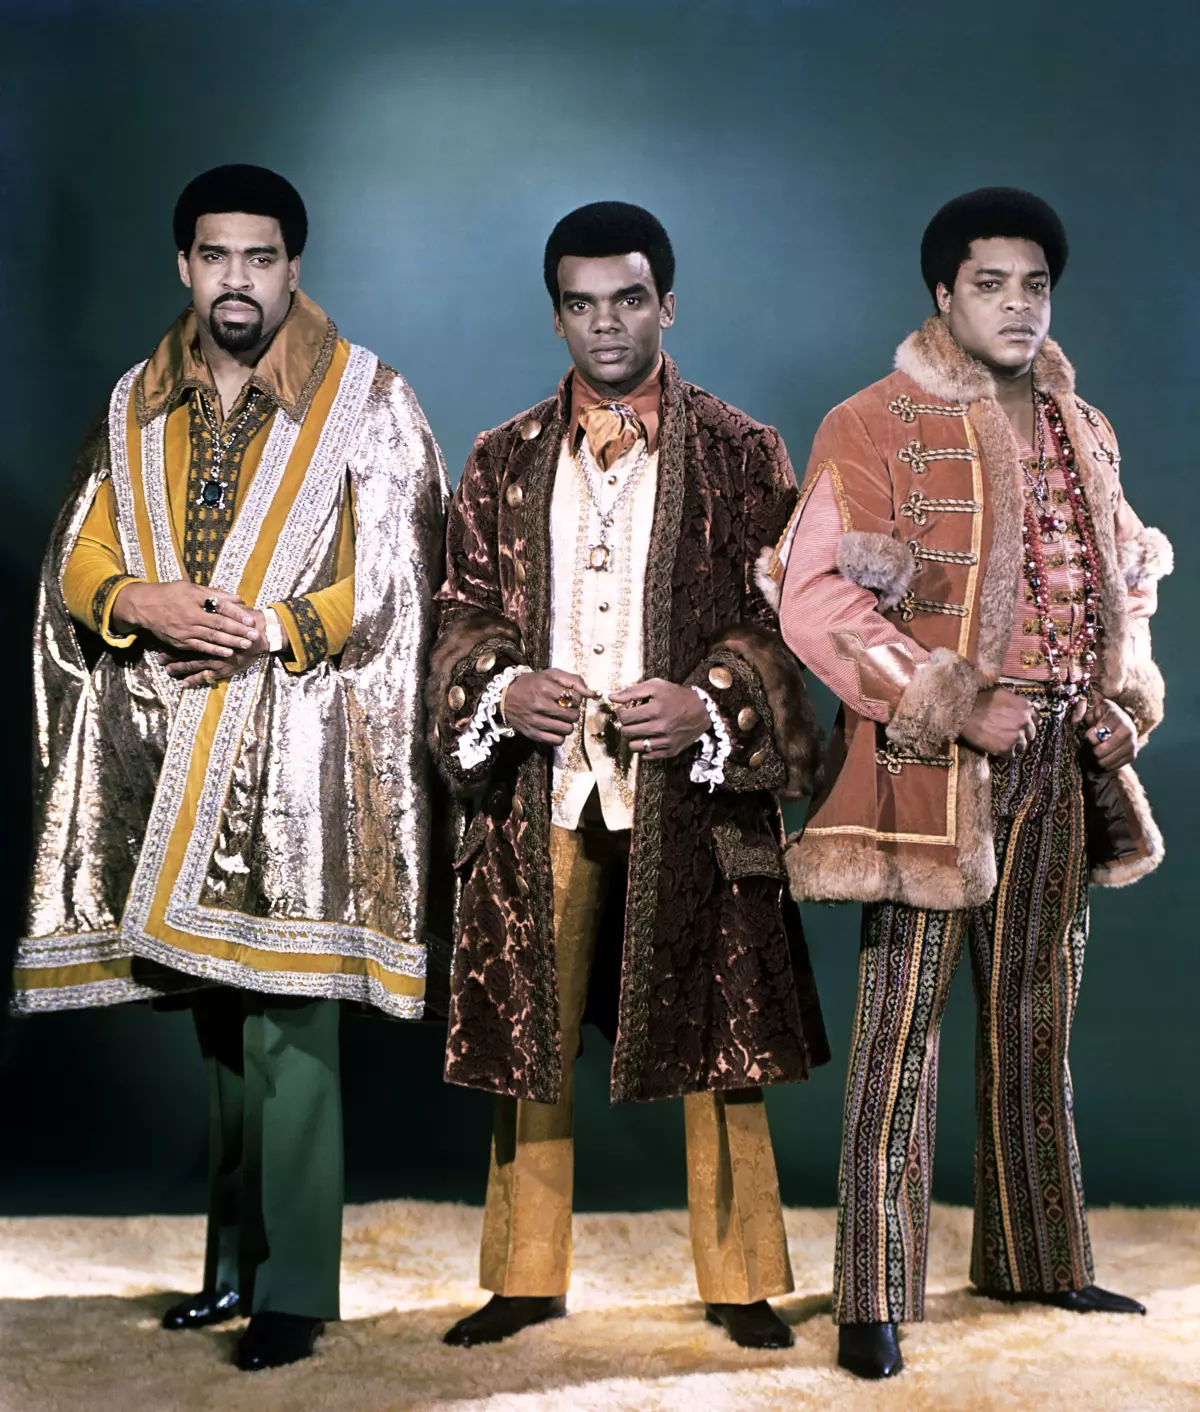 the Isley Brothers